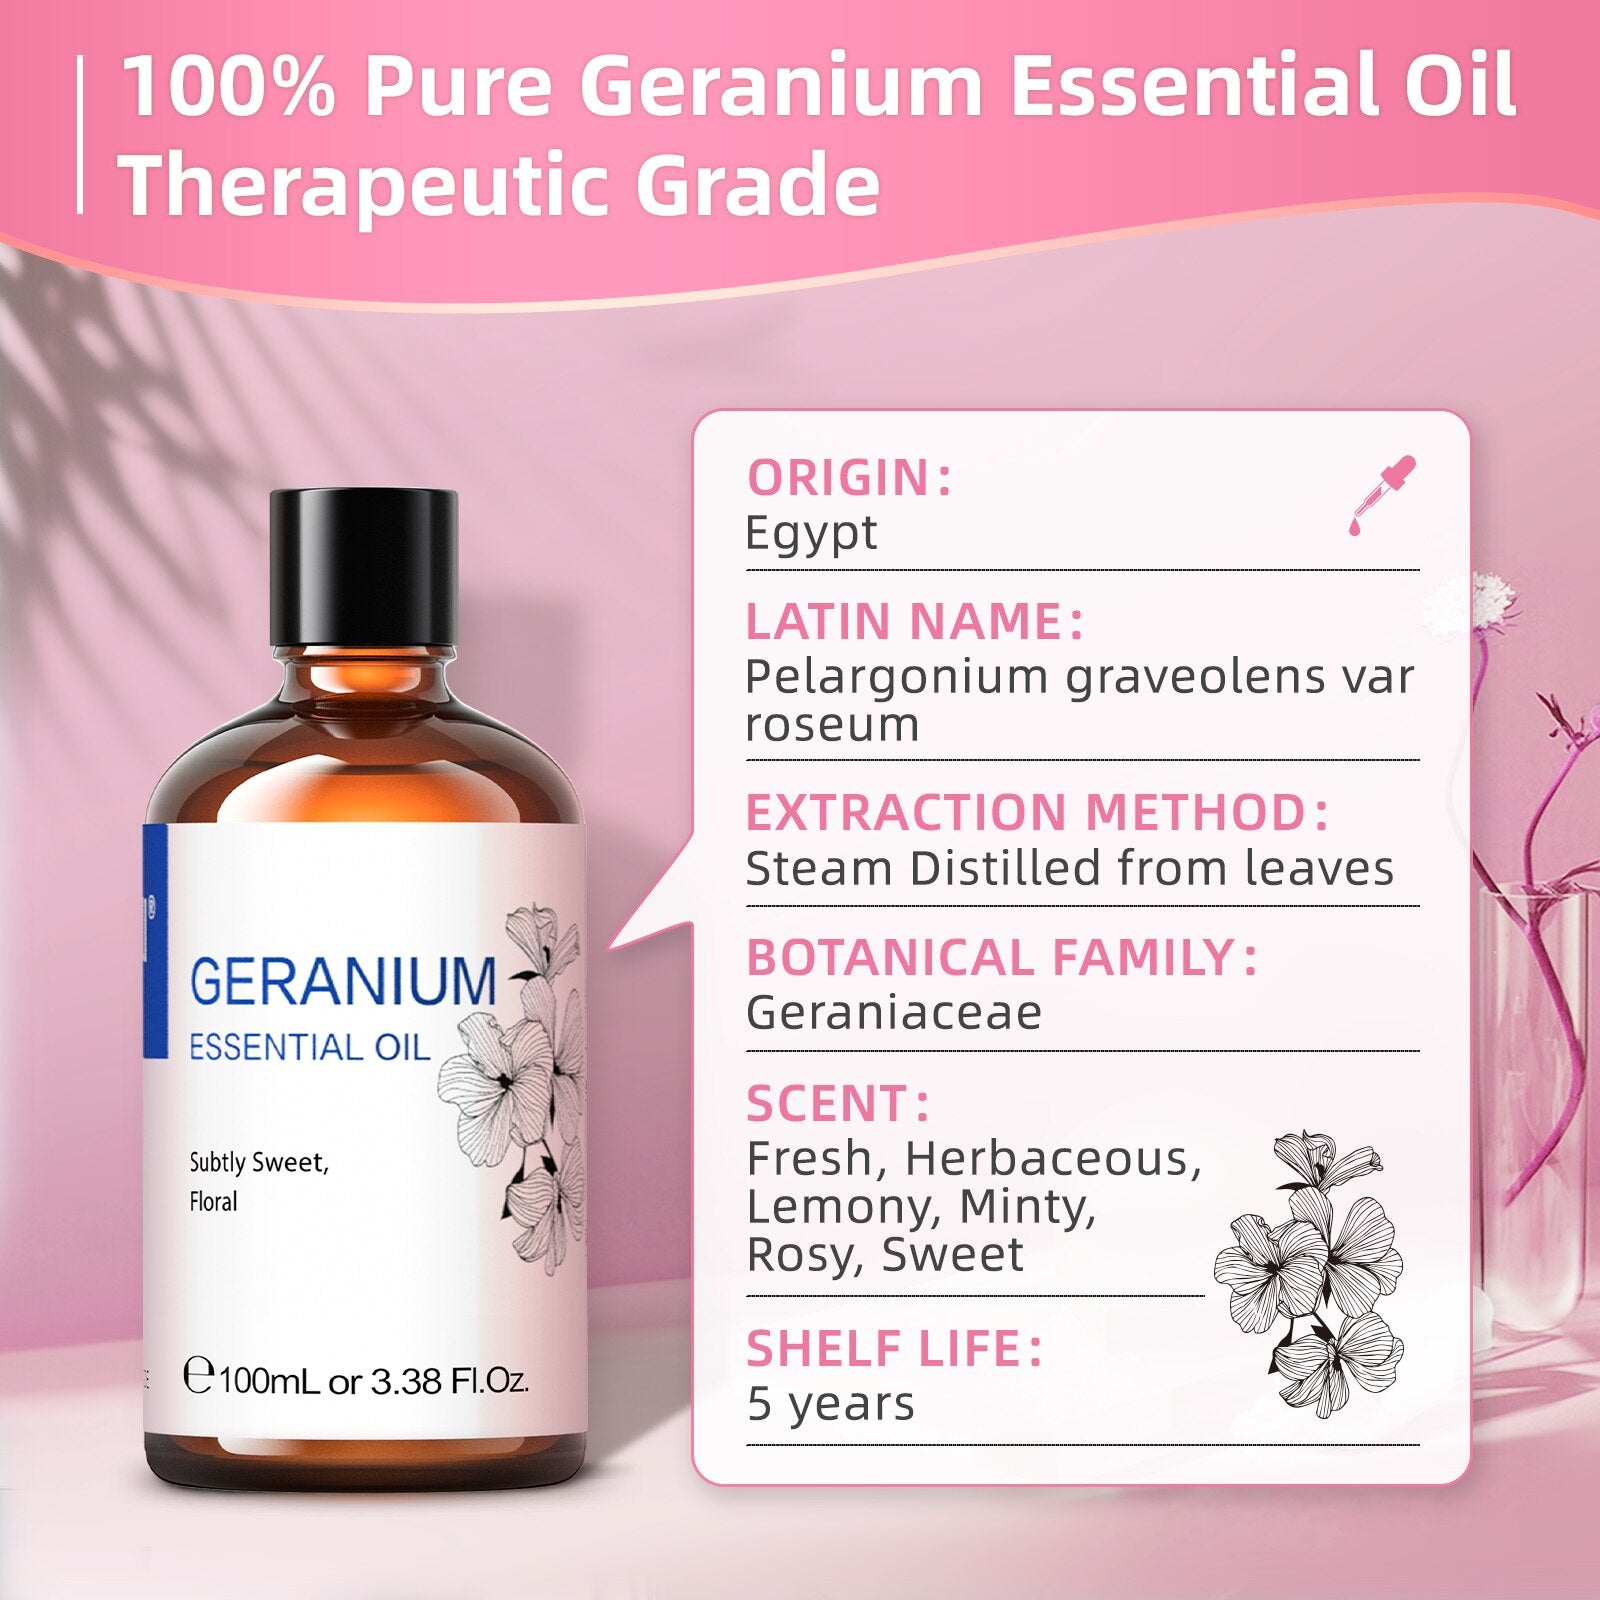 Geranium Essential Oils,100% Pure Nature for Aromatherapy | Used for Diffuser，Humidifier，Massage - todayshealthandwellnessshop